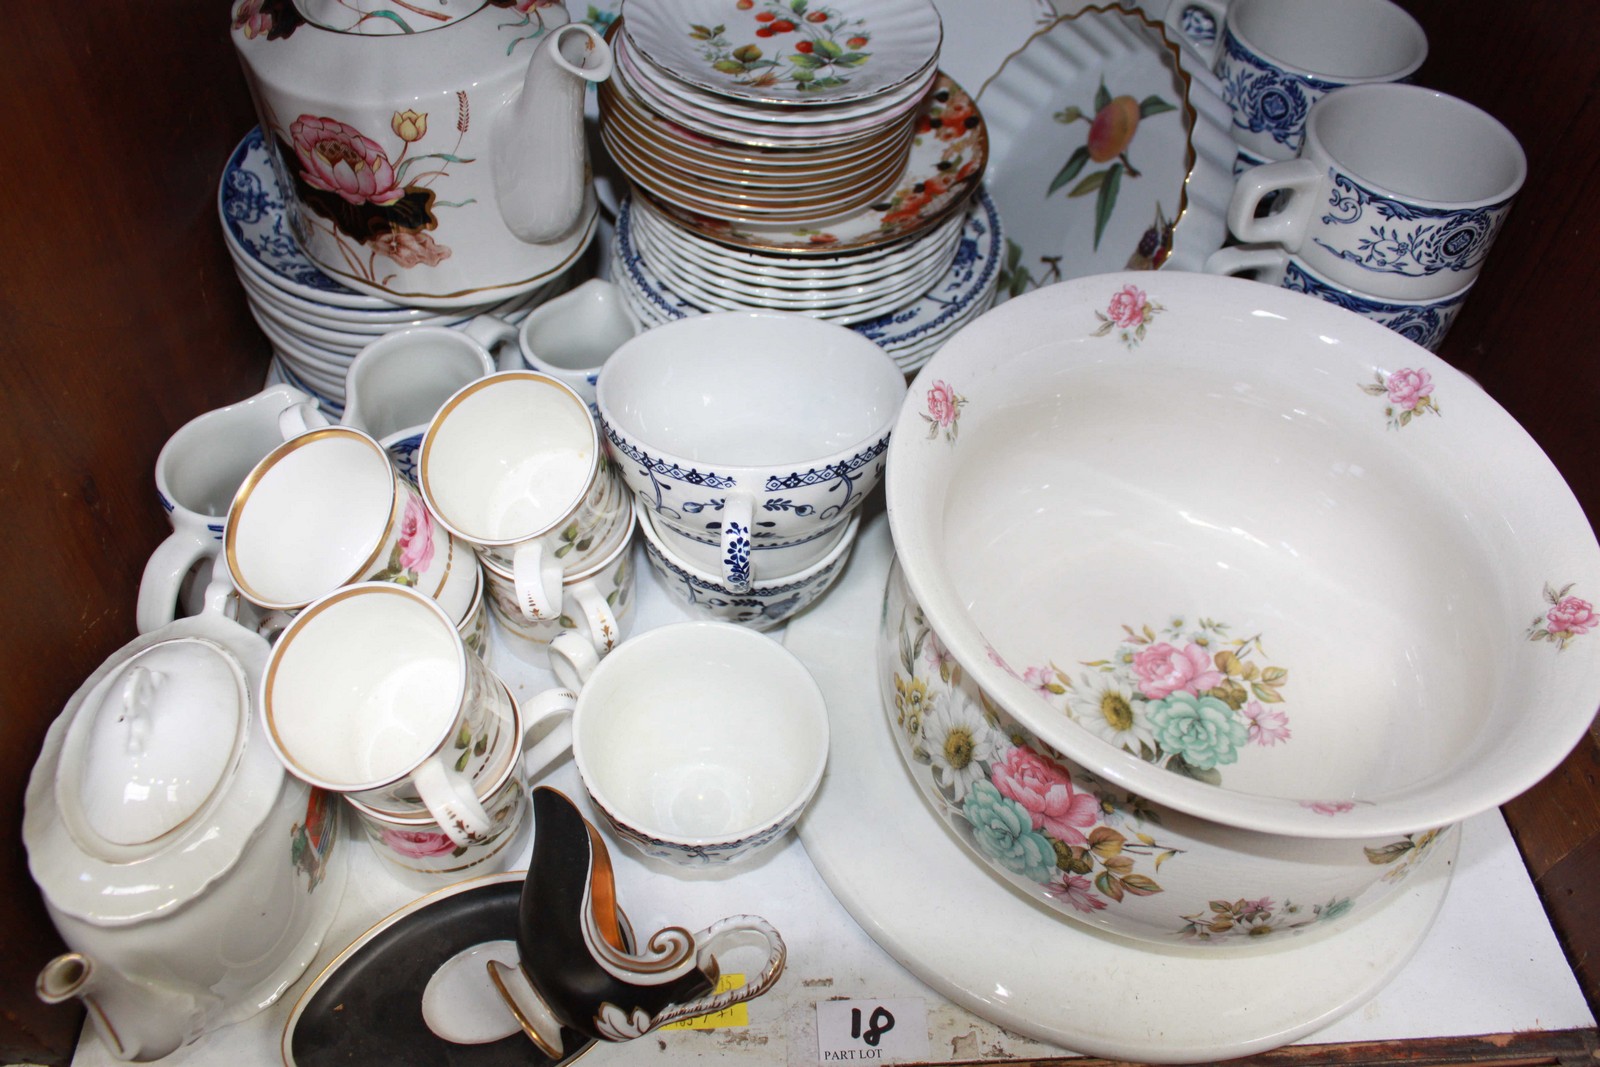 SECTION 20: A collection of assorted china ware and part tea sets.